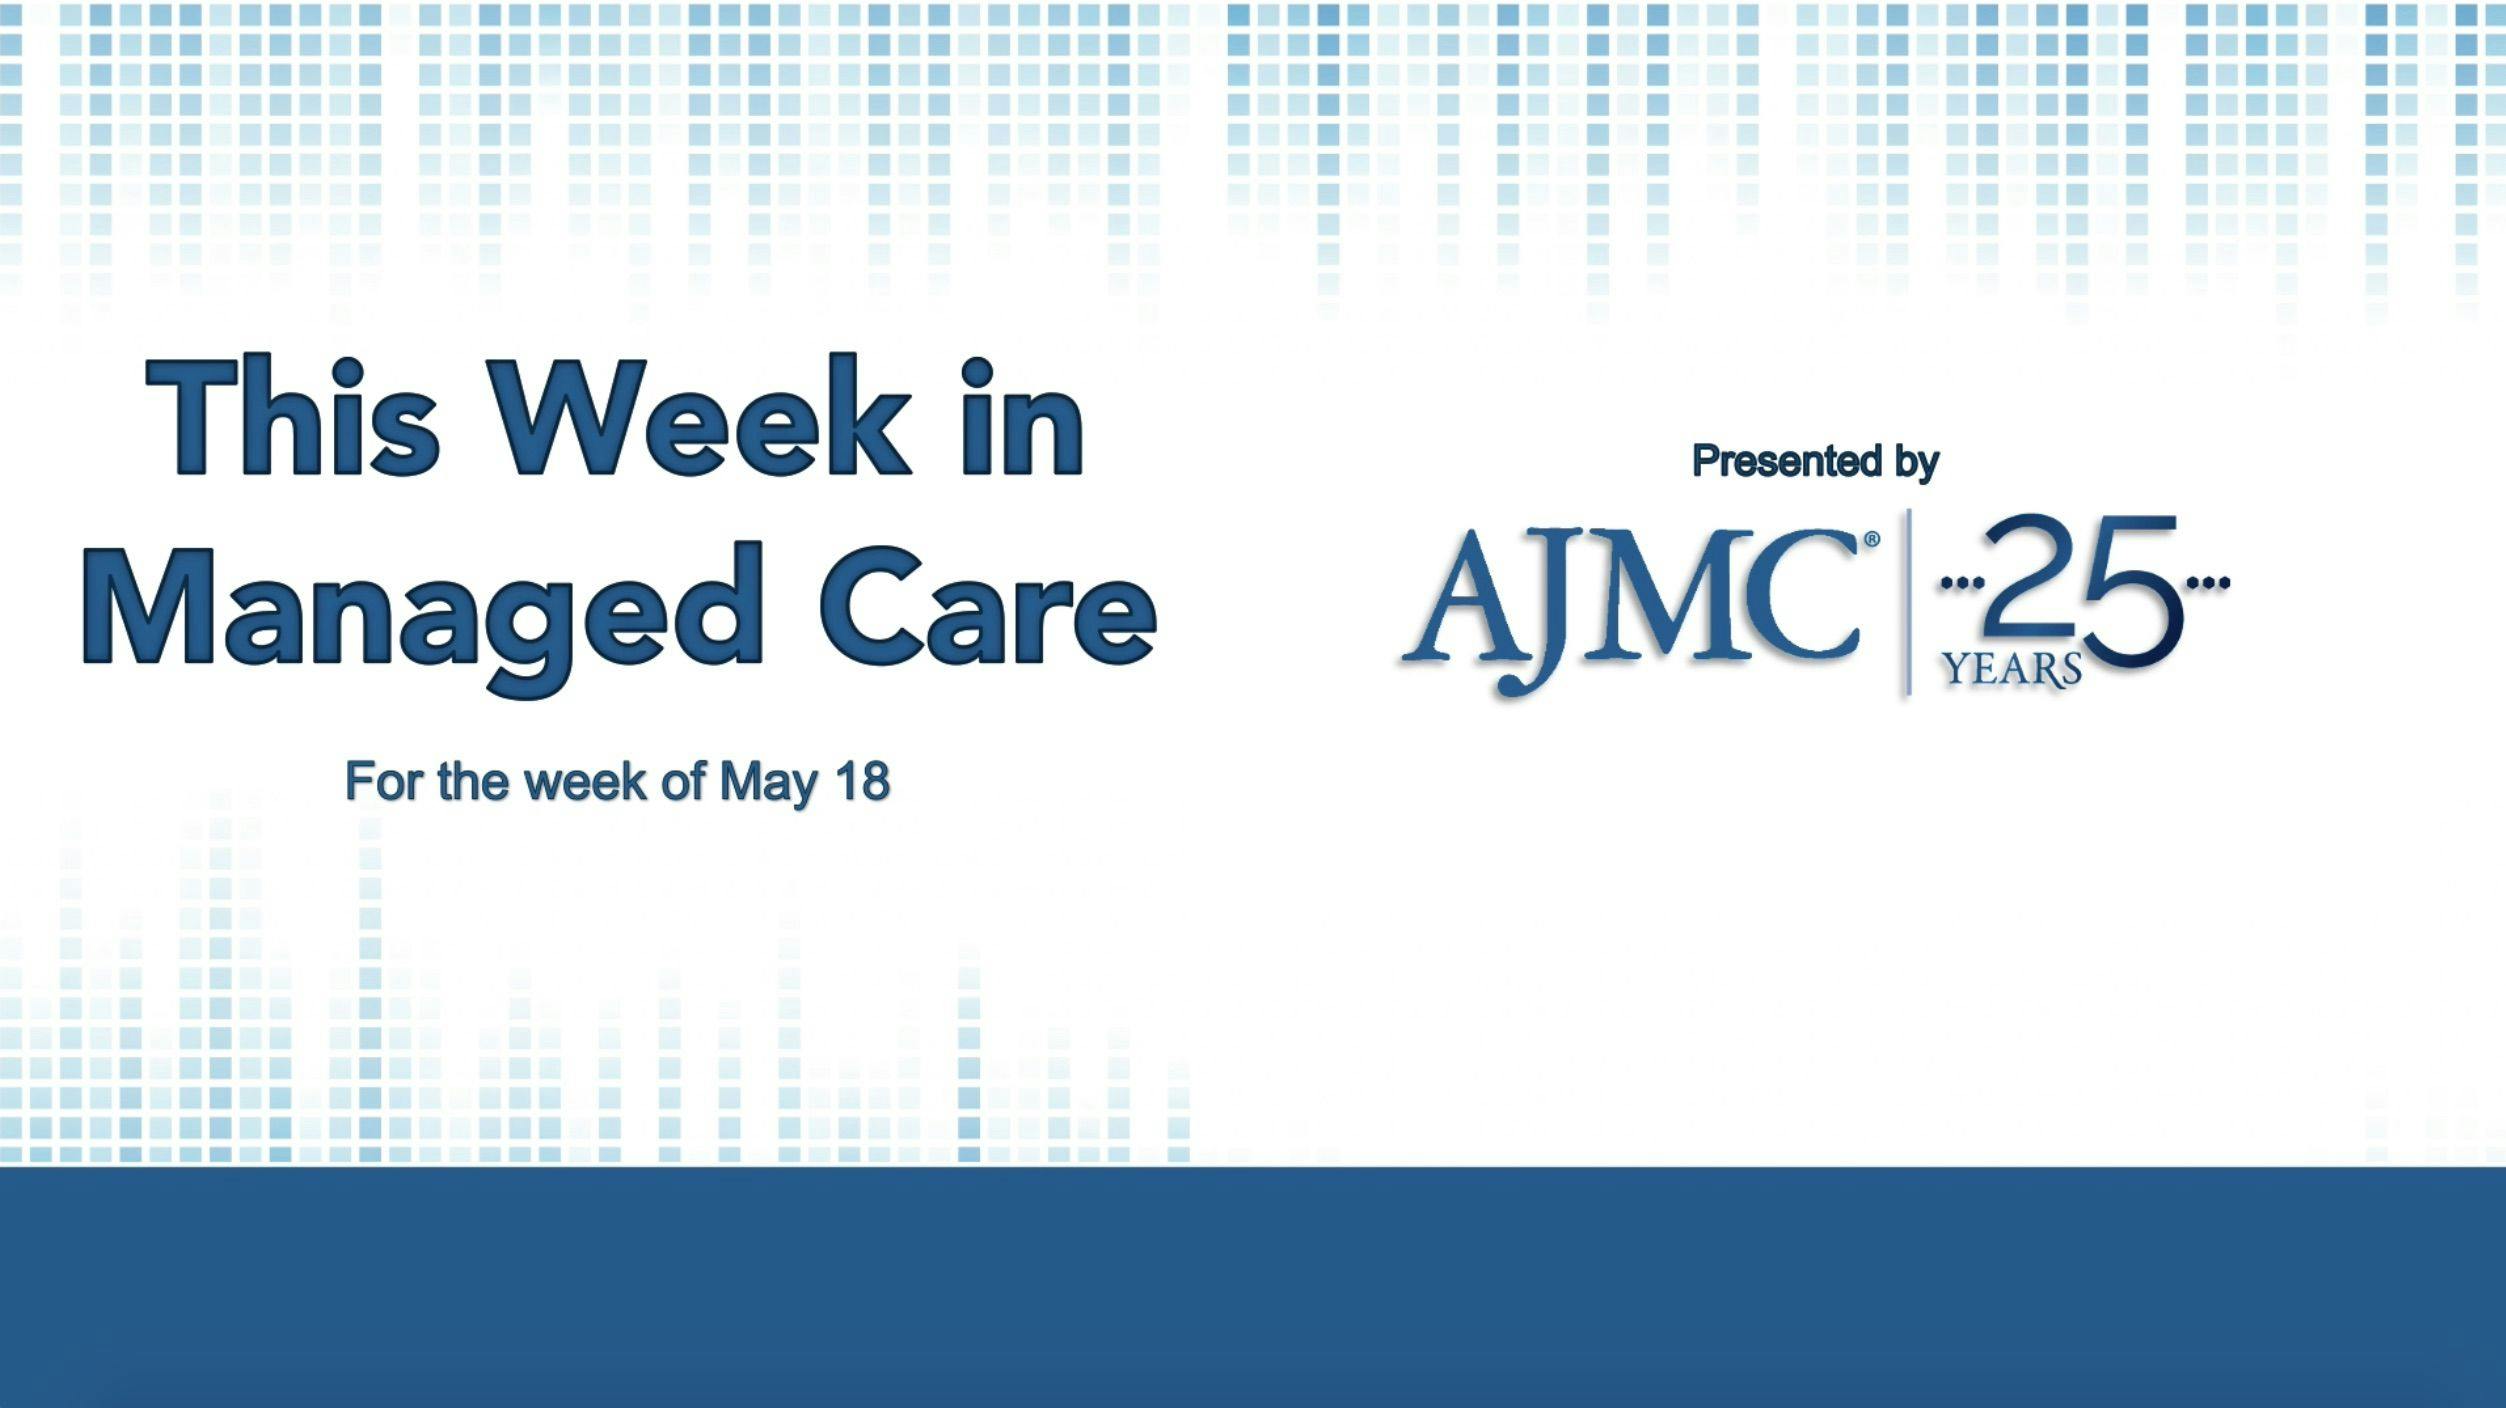 This Week in Managed Care: May 22, 2020